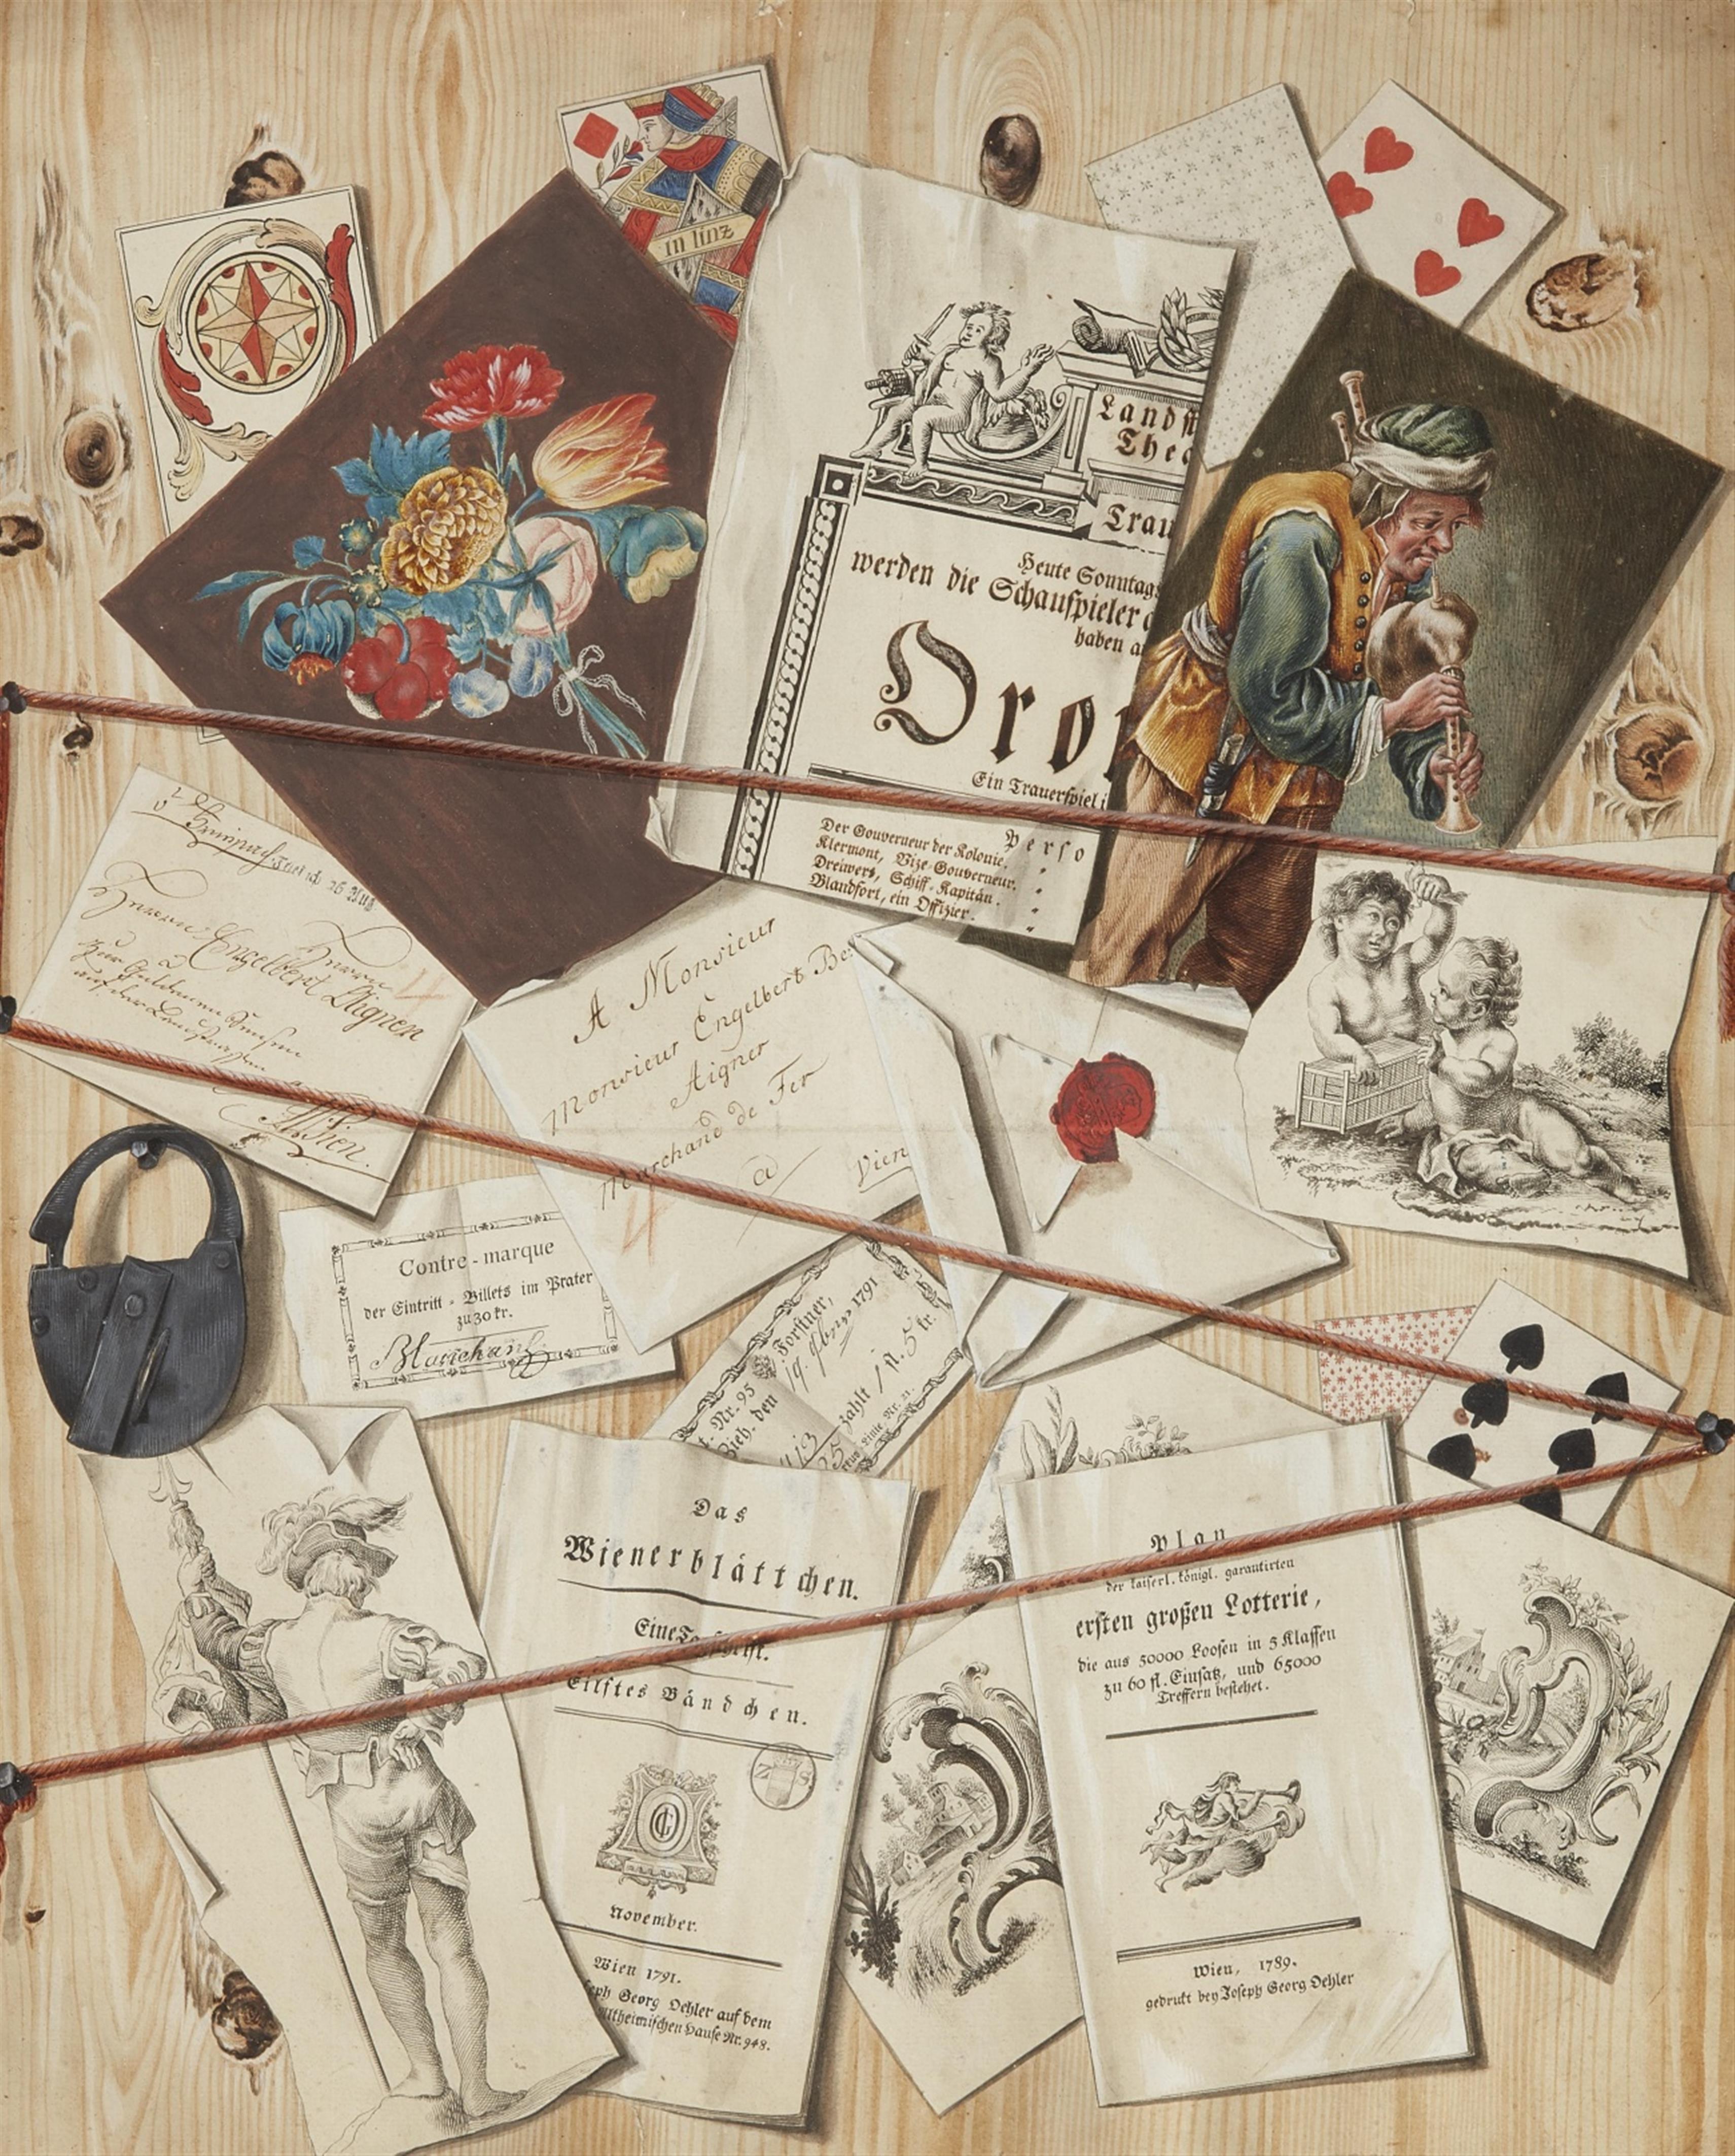 Austrian School late 18th century - Trompe l'oeil with Papers pinned to a Board (Quodlibet) - image-1